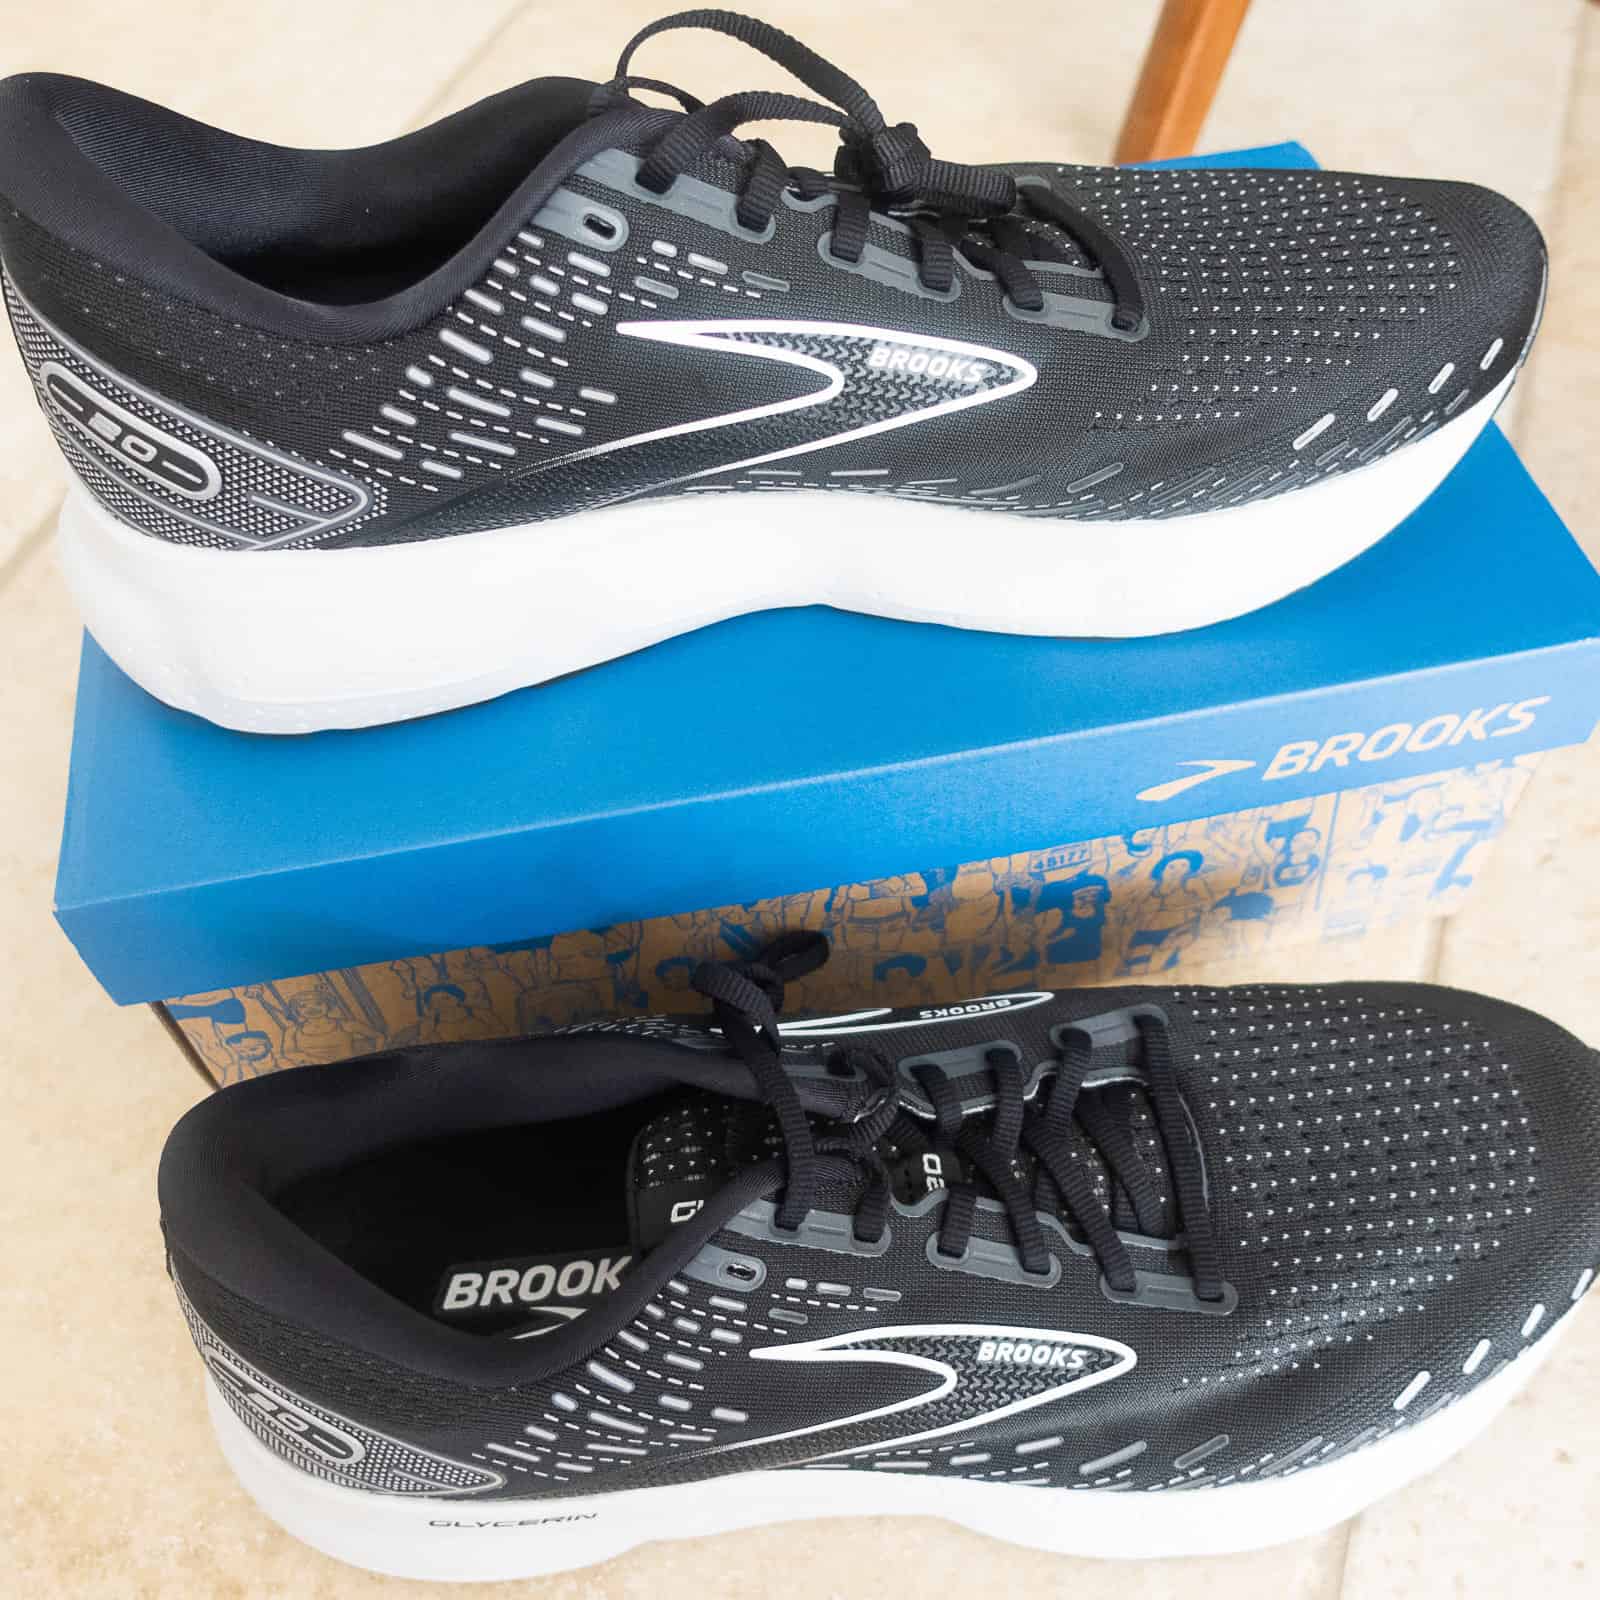 Brooks Sneakers Comfortable Shoes for Disney World